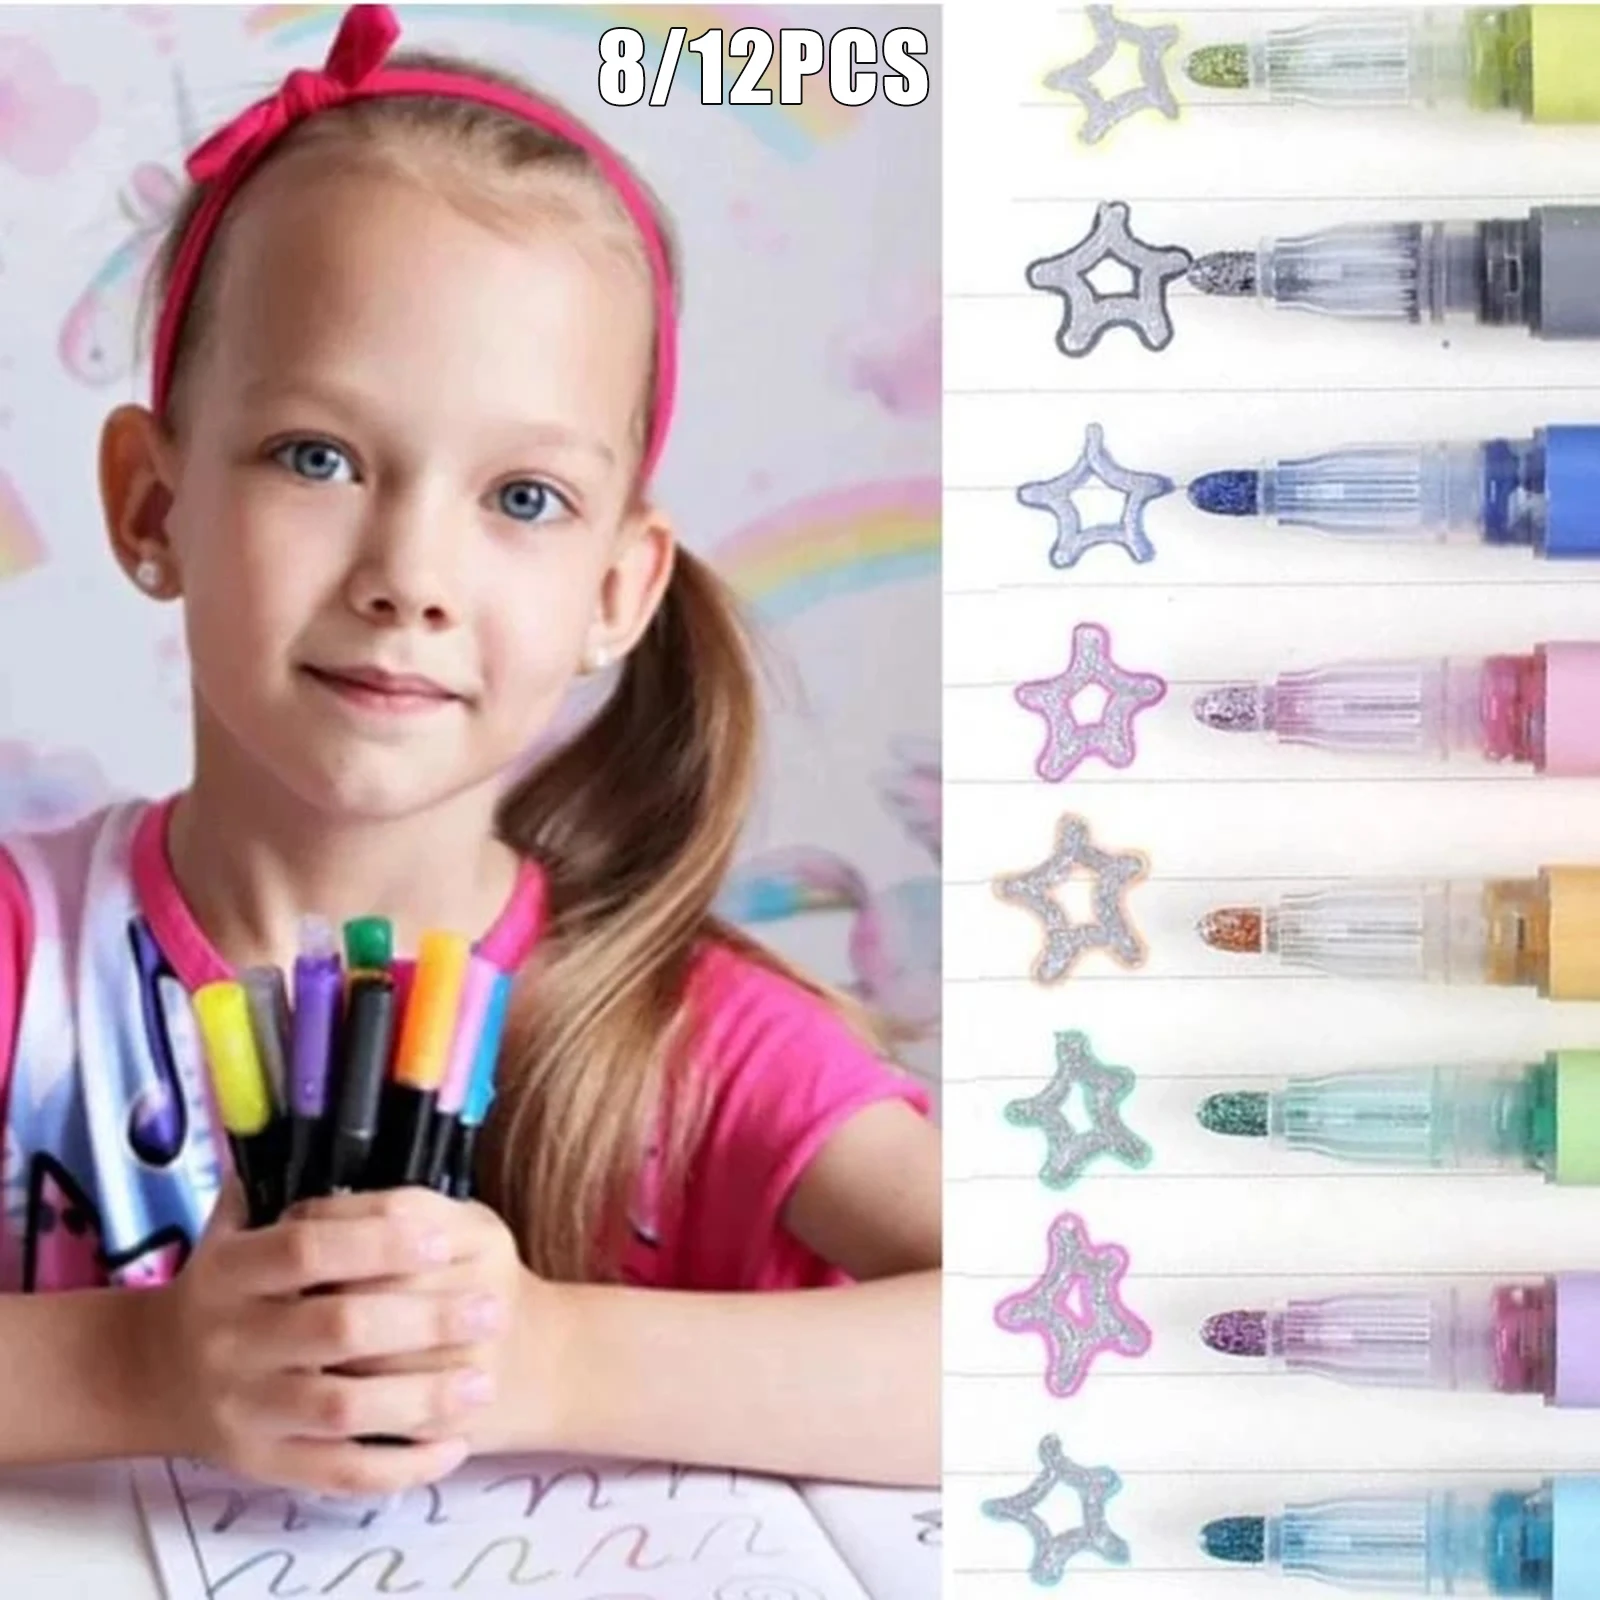 

8/12pcs Marker Pen for Highlight Writing Taking Notes Drawing DIY Art Projects Kids Adult Markers Pens Supplies Paint Markers